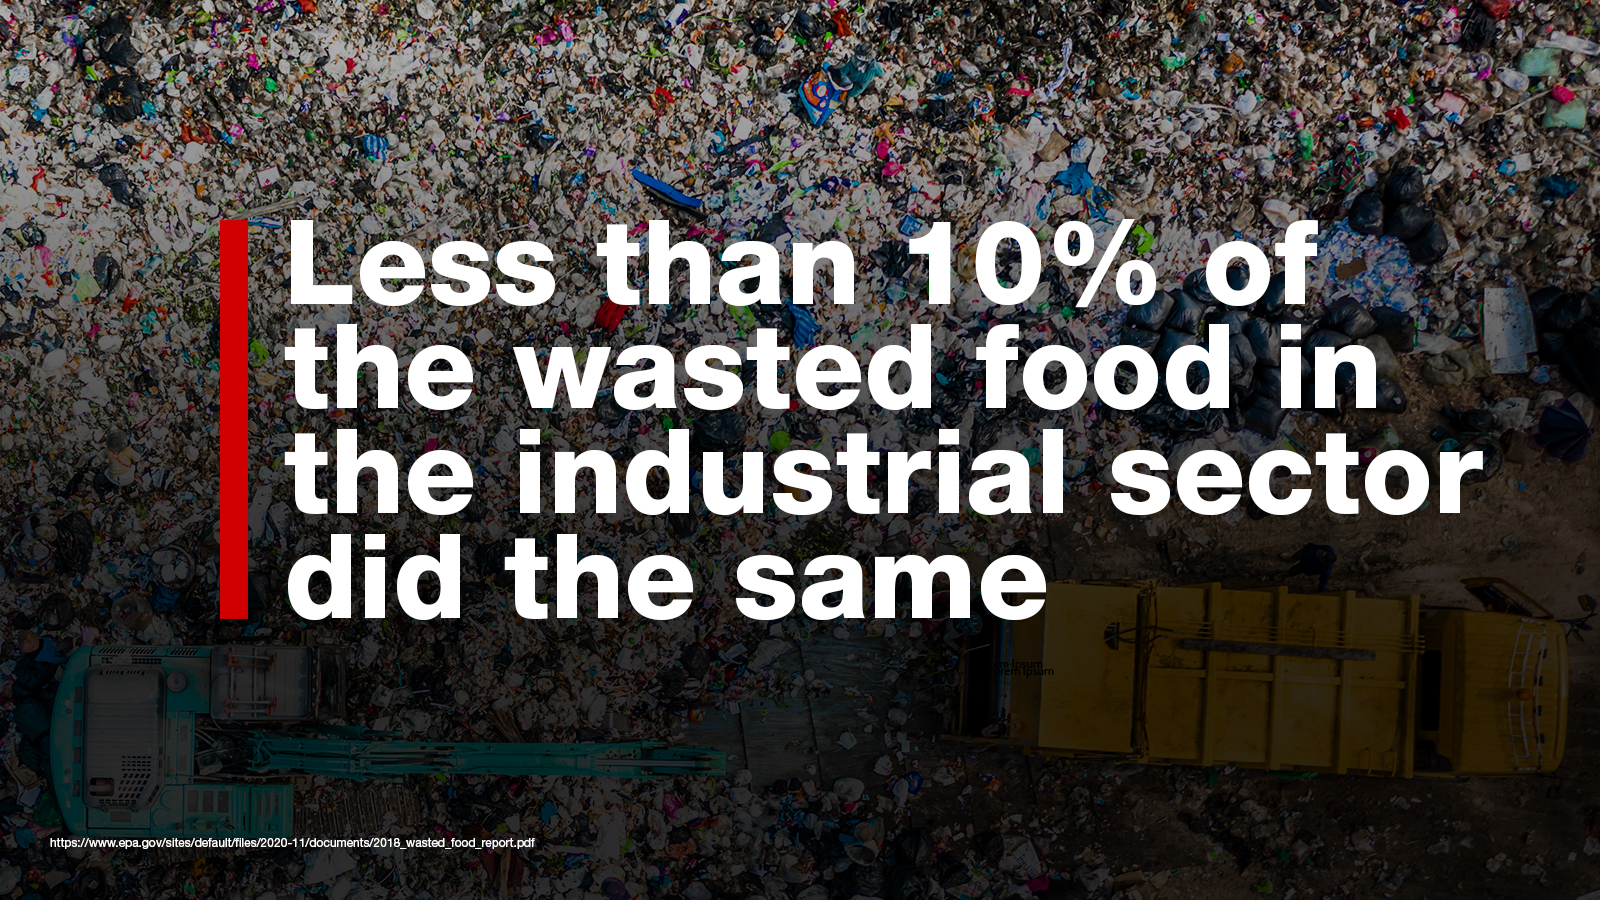 Less than 10% of industrial food waste did the same